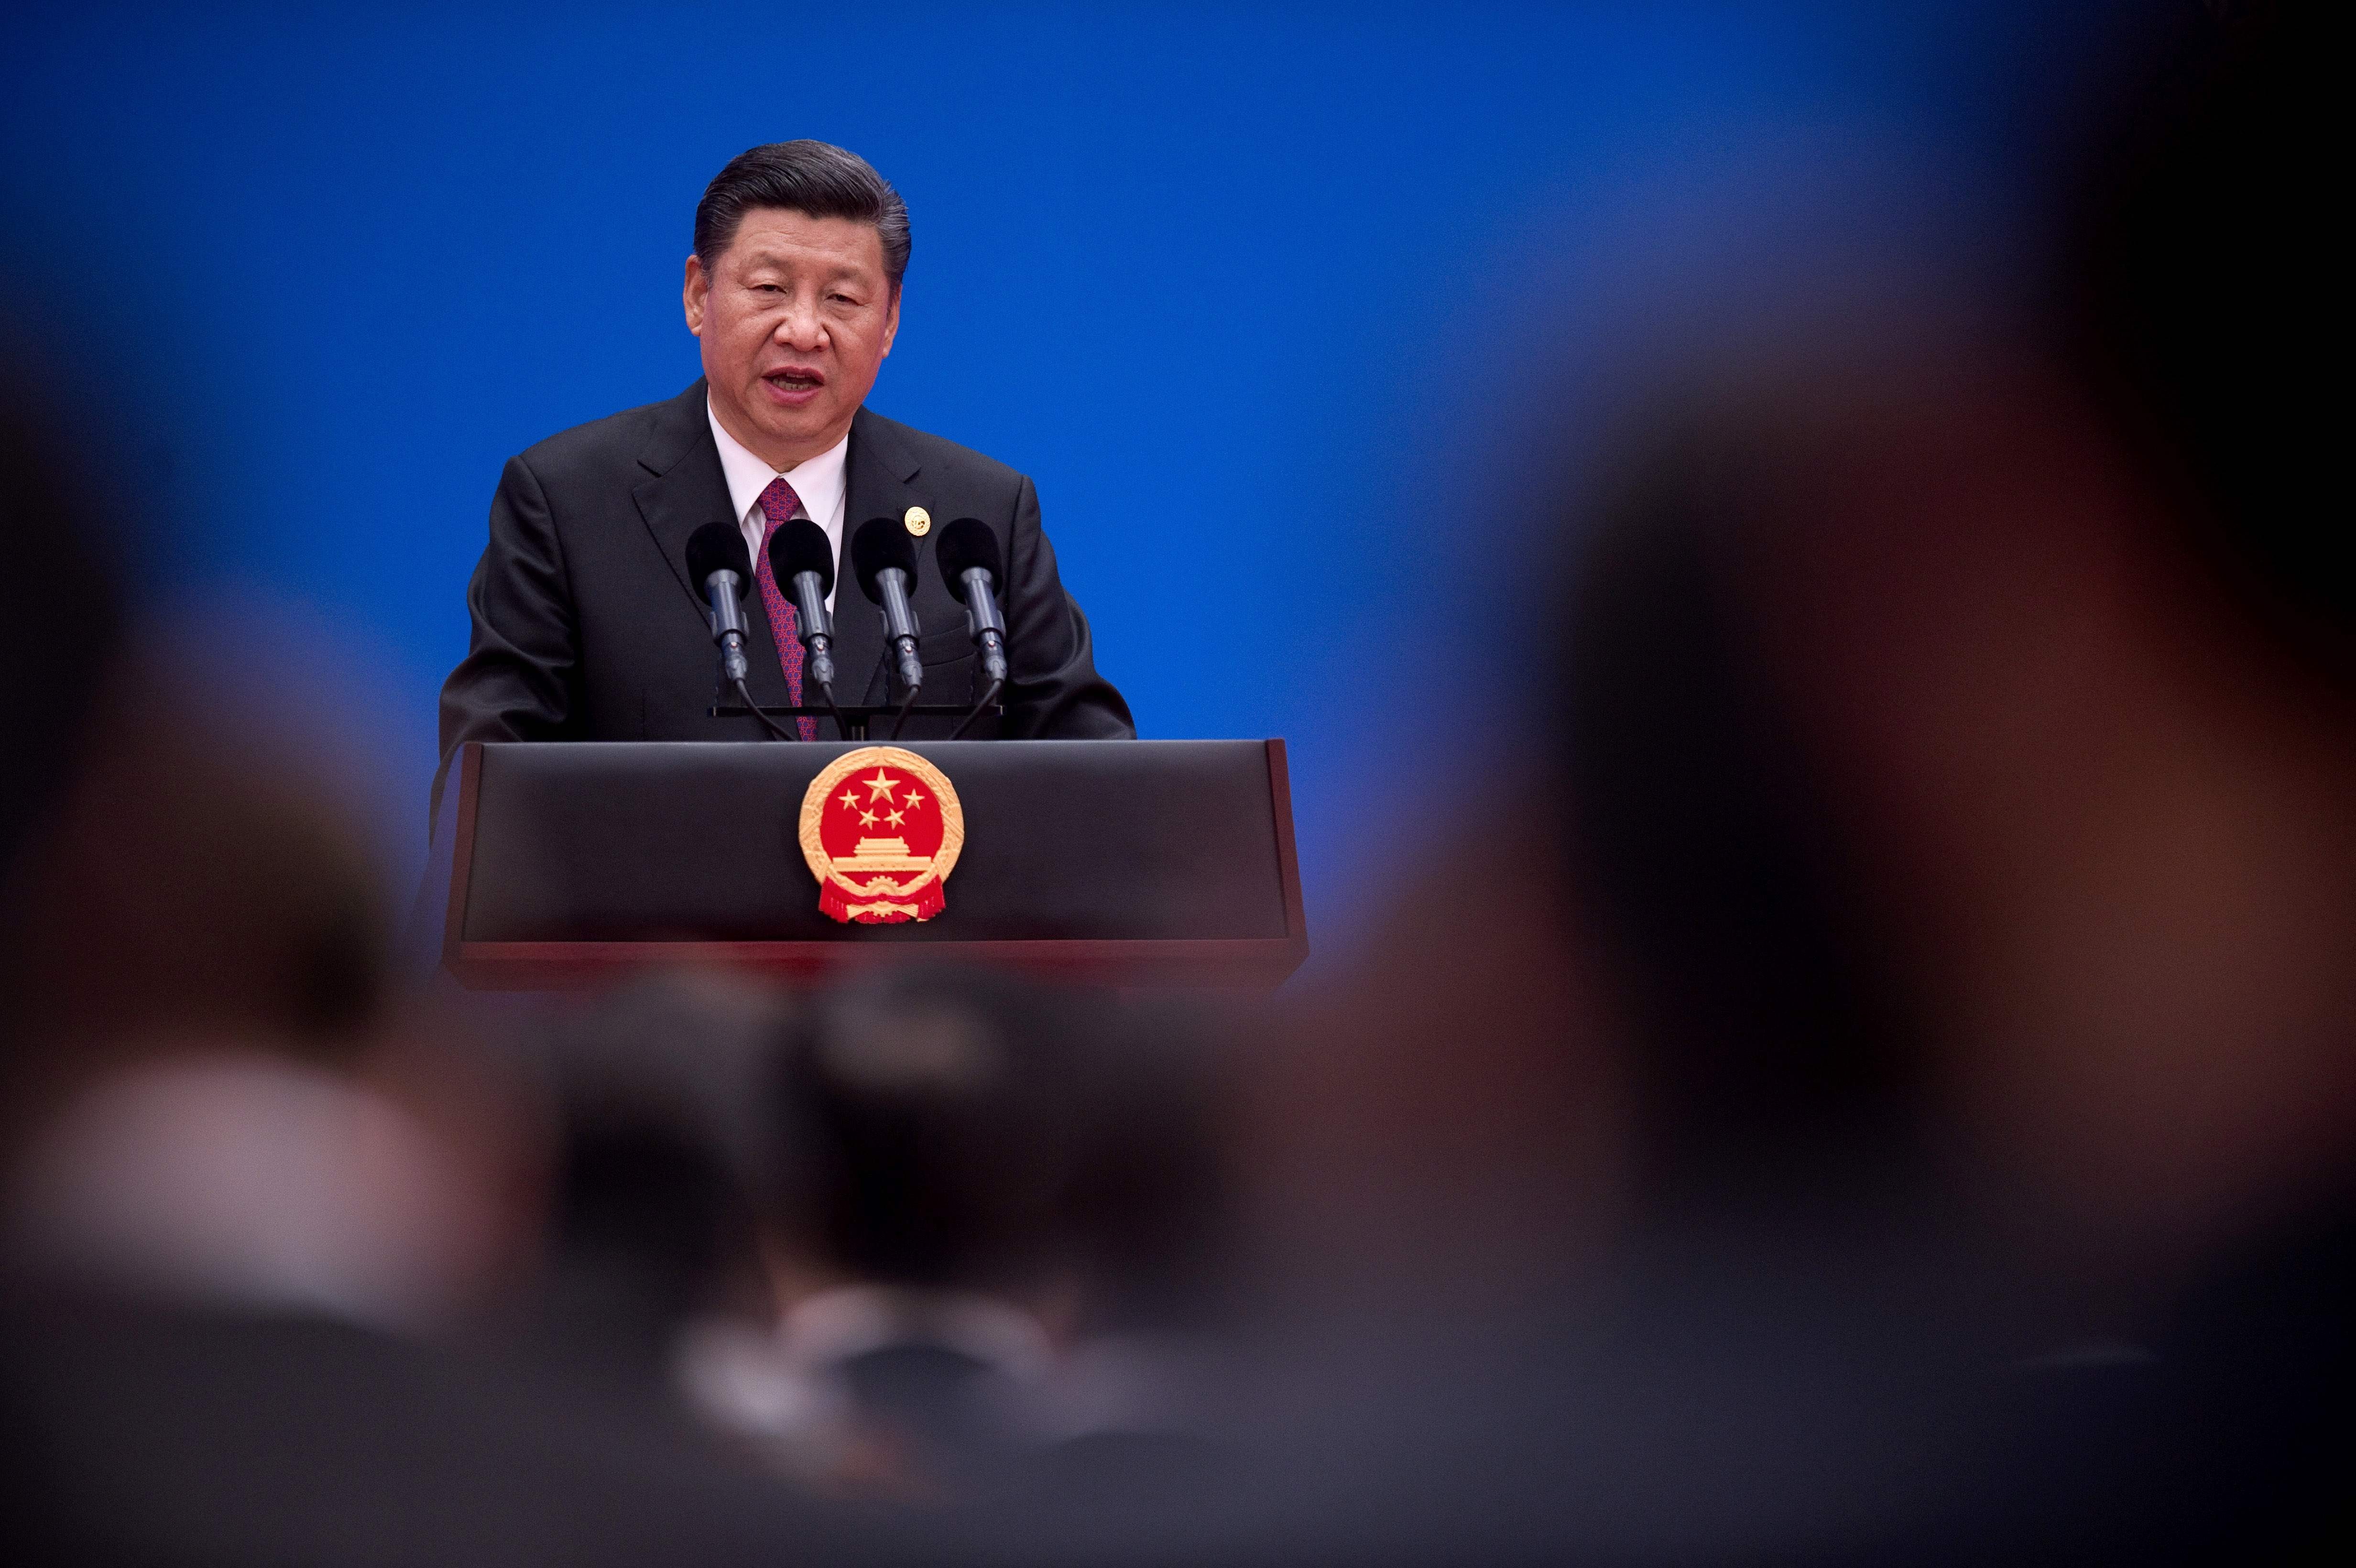 President Xi Jinping speaks during a news conference at the belt and road forum, at the International Conference Centre in Yanqi Lake, north of Beijing, on May 15. Xi not only spearheaded the Belt and Road Initiative, but he also played a pivotal role in forging international consensus to secure the Paris climate change agreement in 2015. Photo: AFP